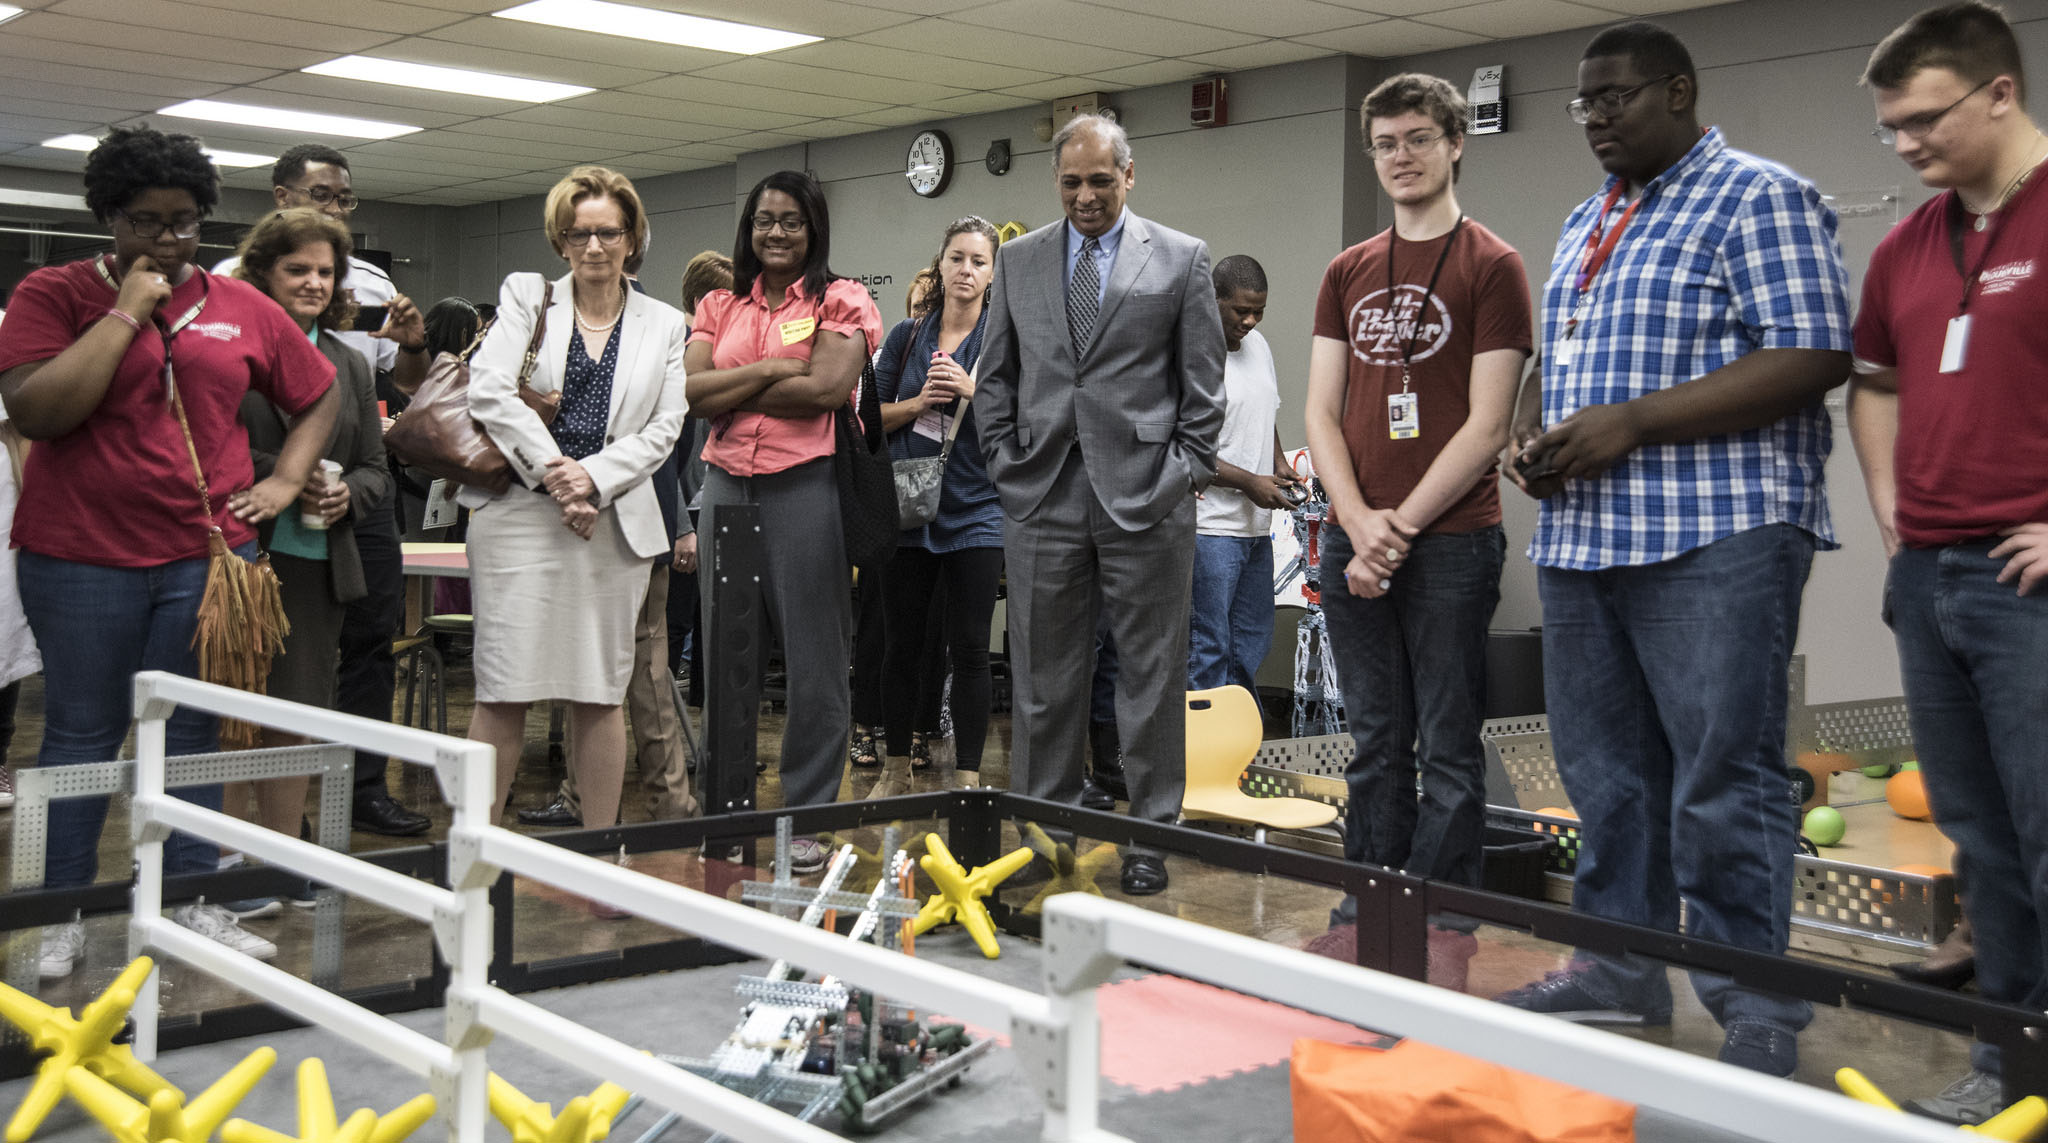 UofL's Speed School of Engineering will be hands-on at Central High School with the creation of a 'maker space' for learning in the STEM fields.